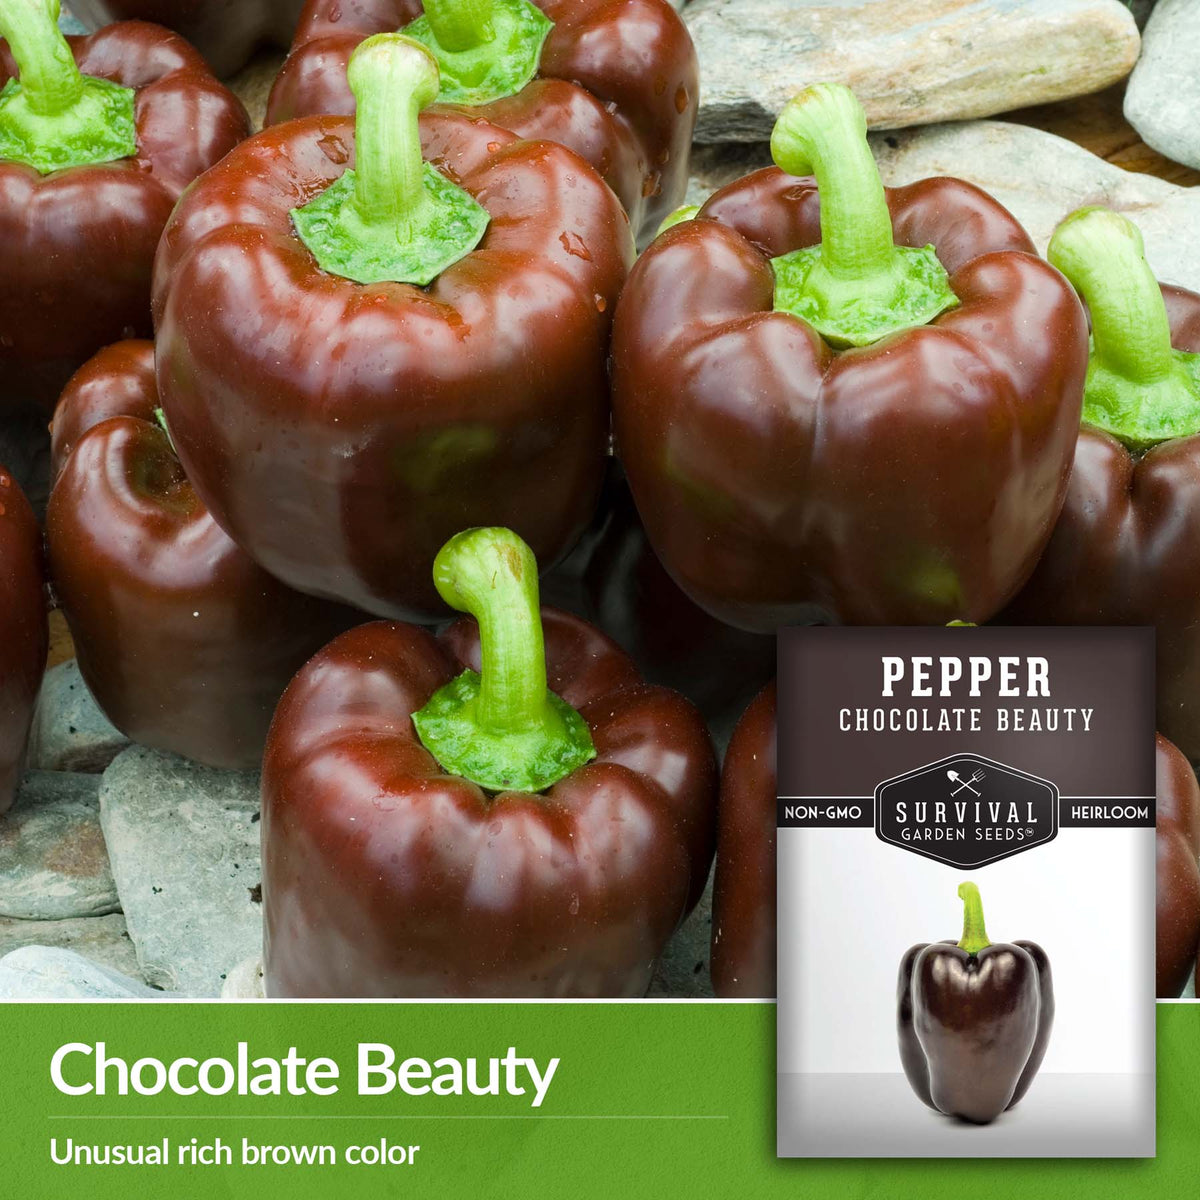 Chocolate beauty peppers have an unusual rich brown color